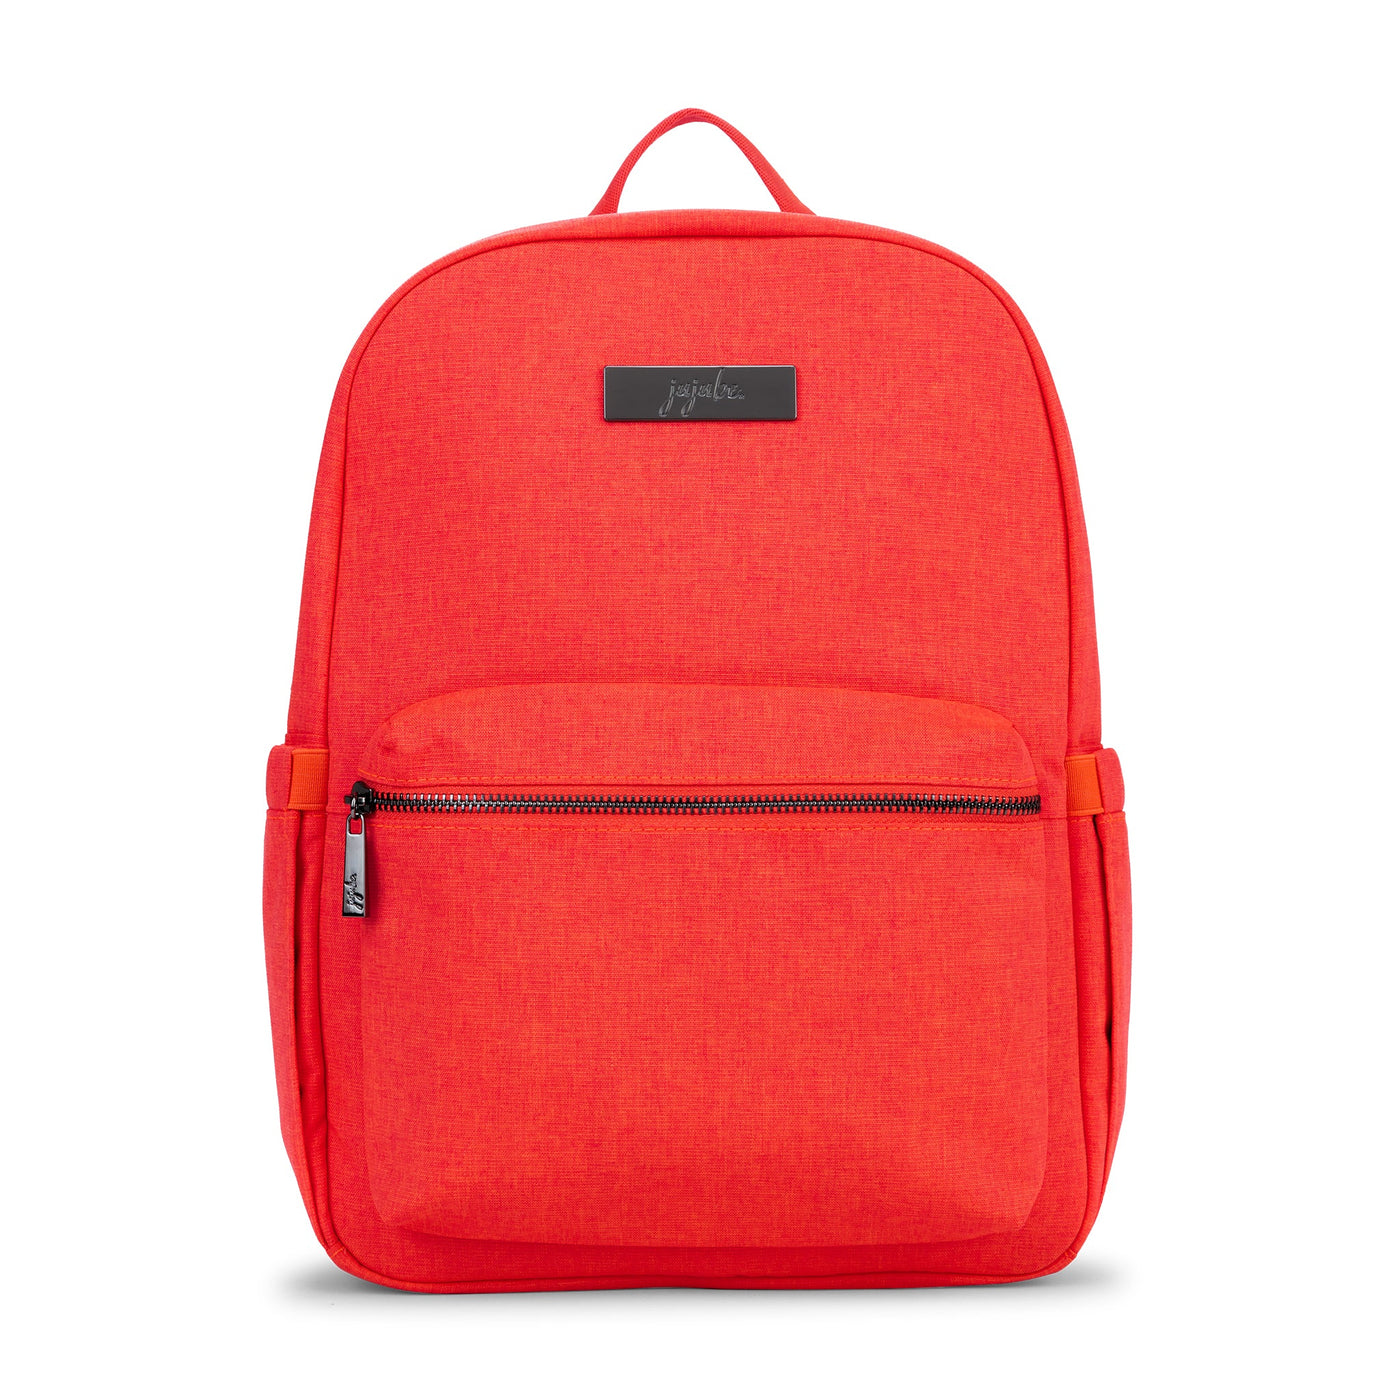 Midi Backpack - Neon Coral by JuJuBe